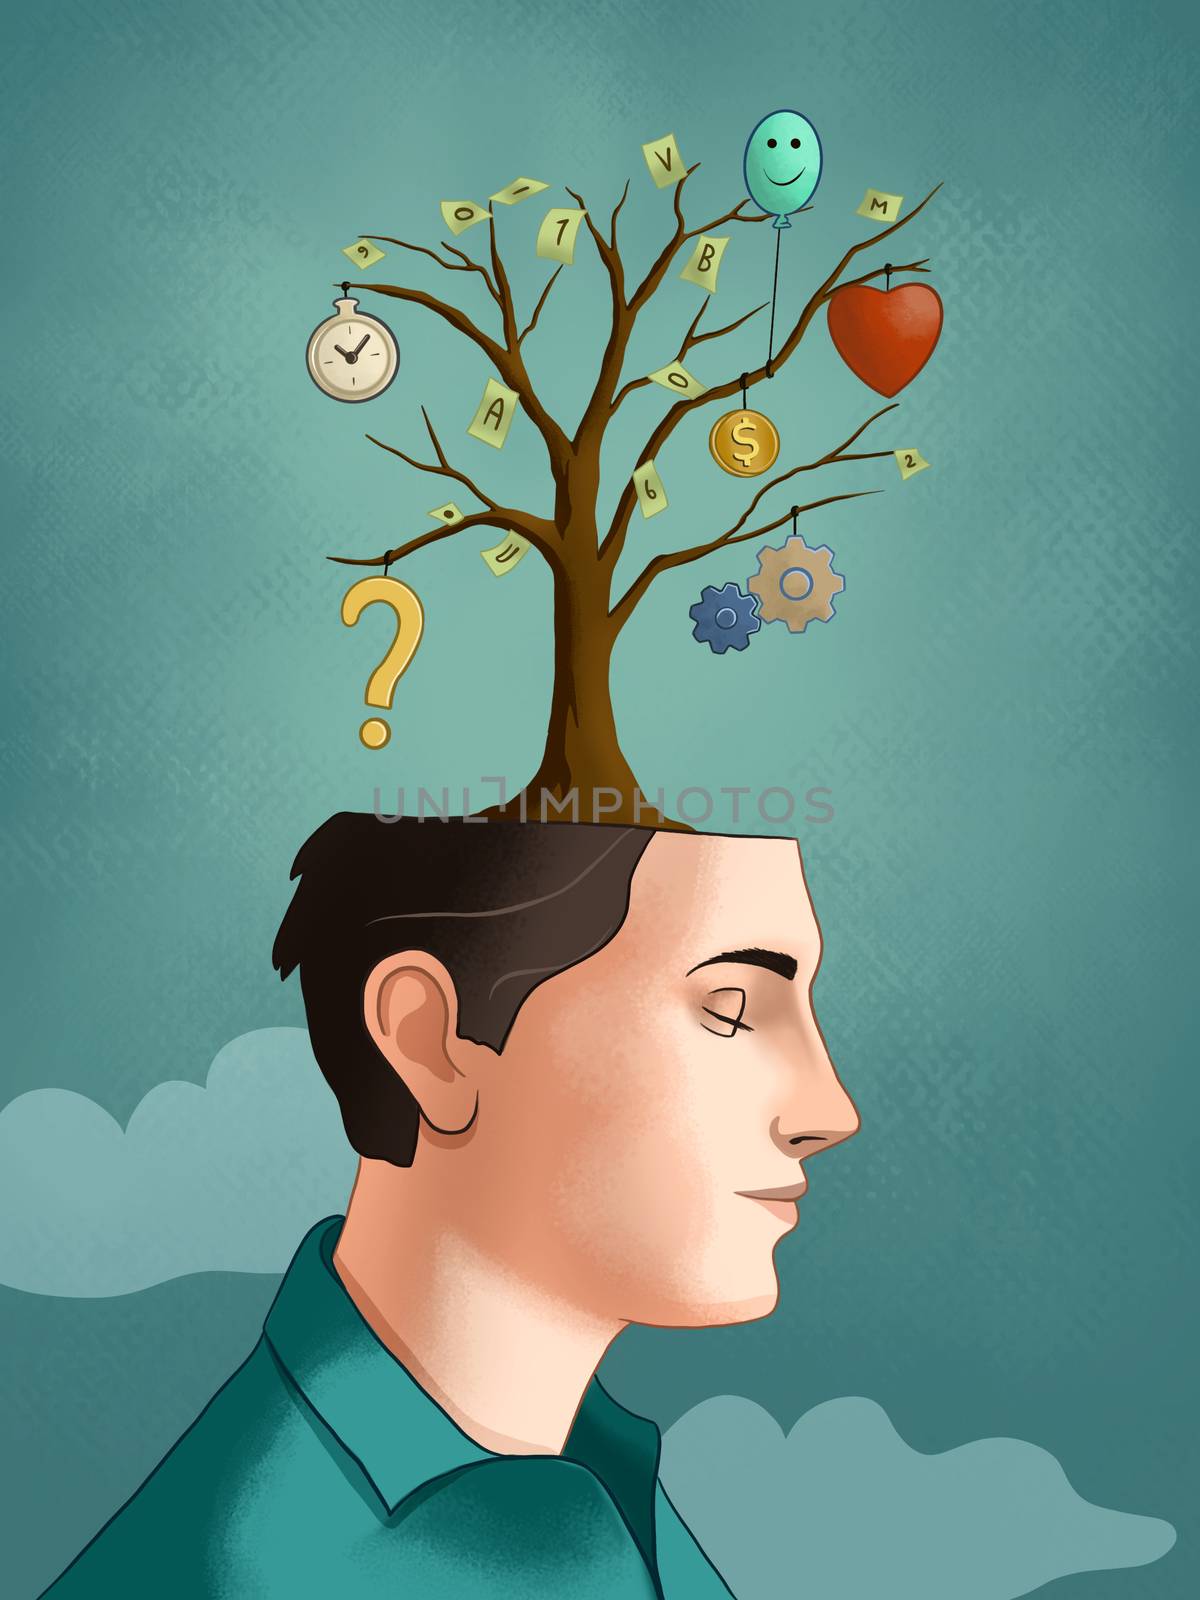 Different thoughts growing on a tree by Andreus